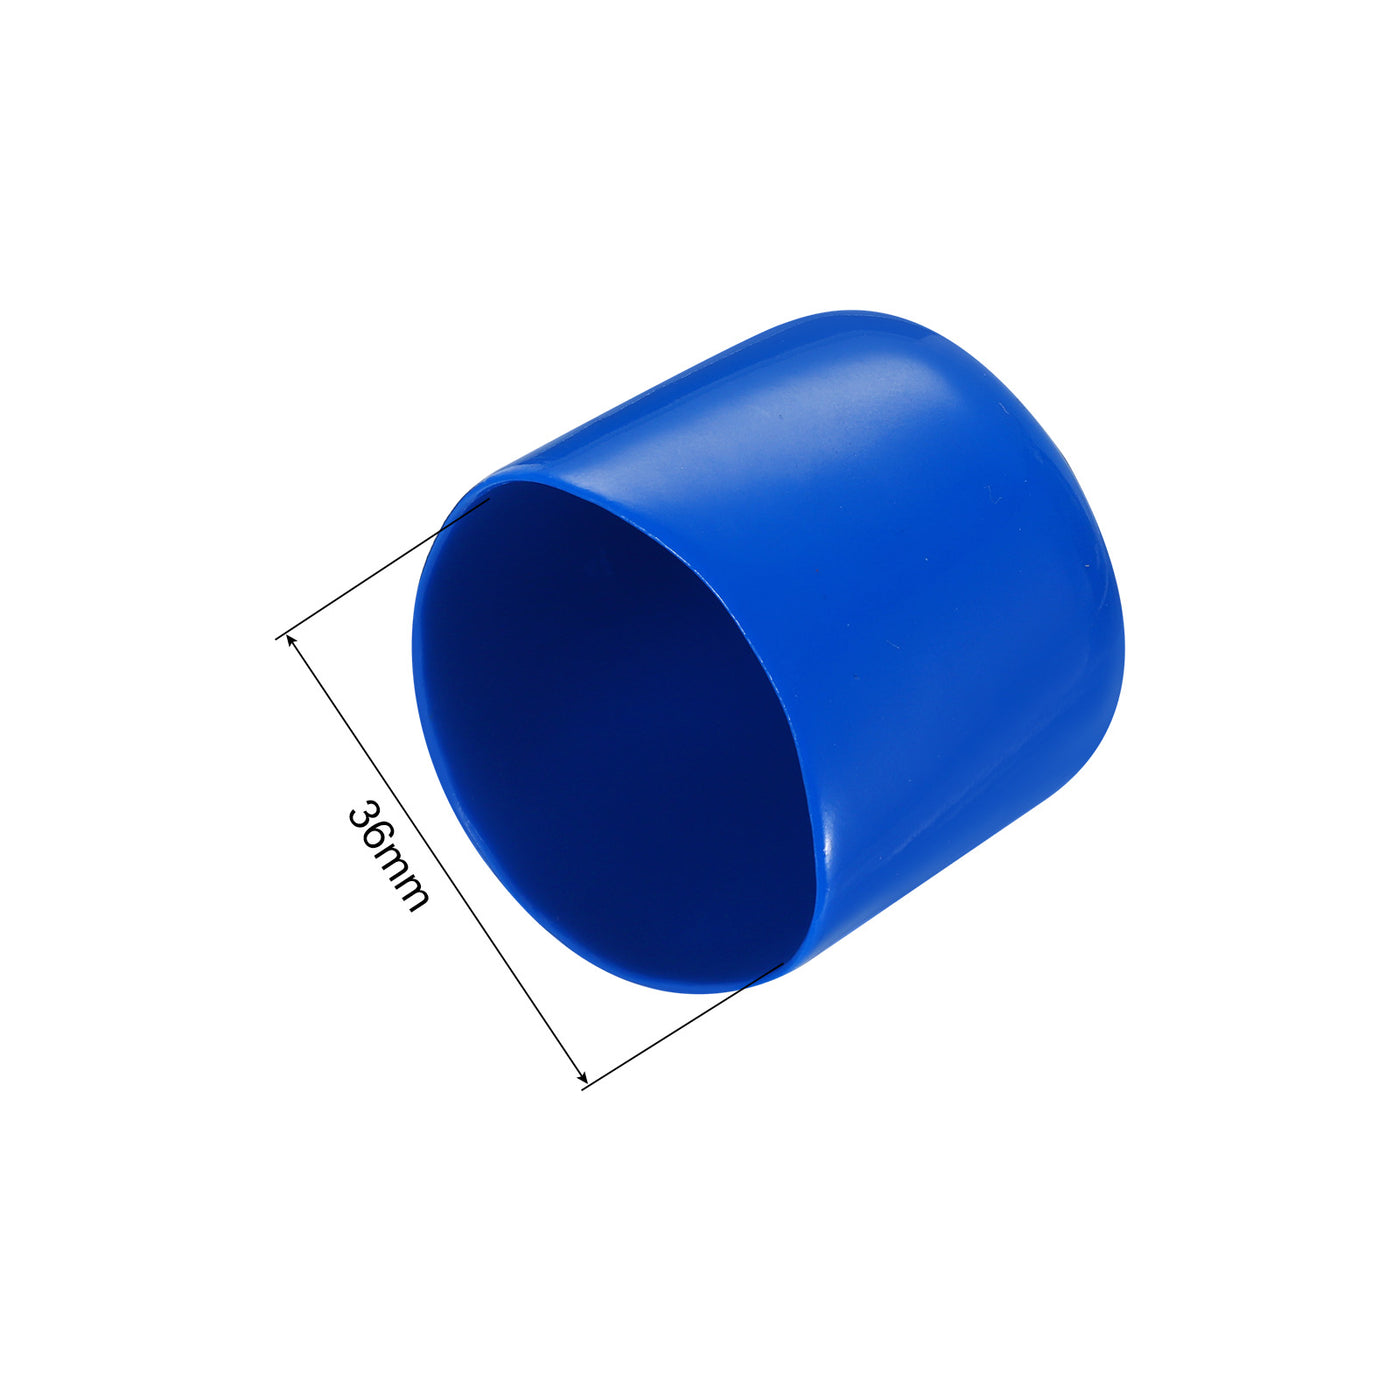 uxcell Uxcell 10pcs Rubber End Caps 36mm ID Vinyl Round End Cap Cover Screw Thread Protectors Blue